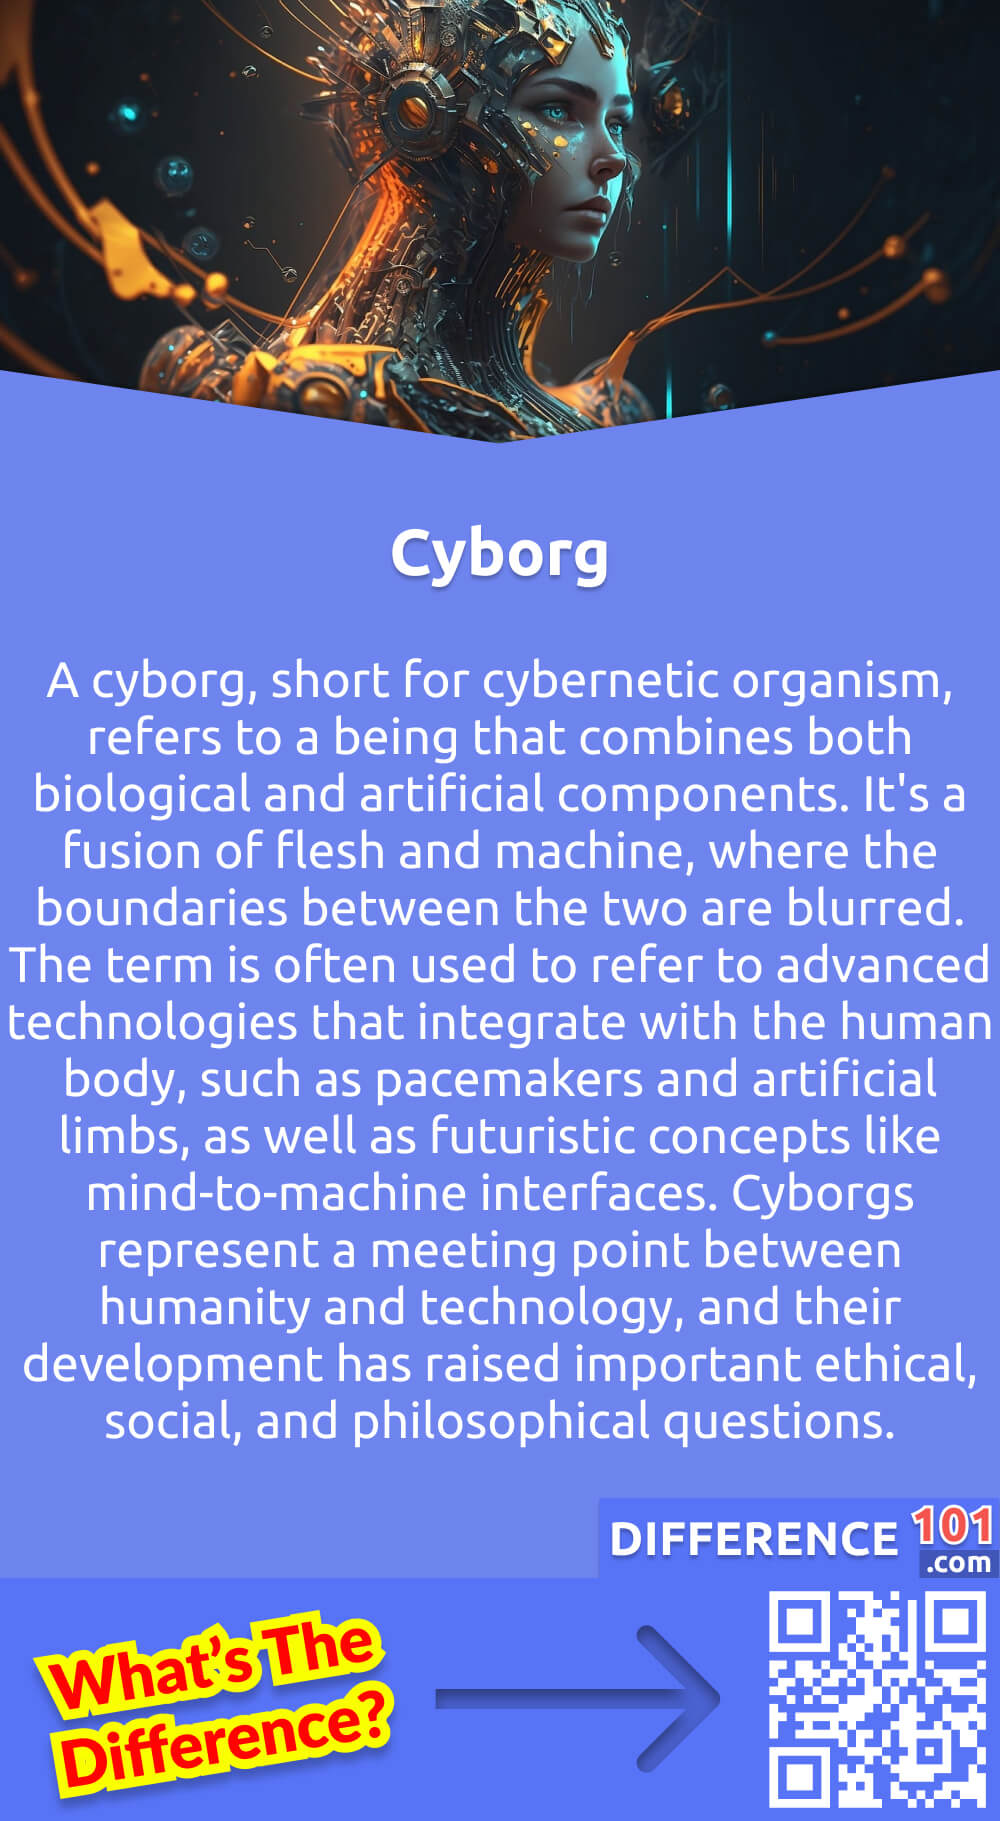 What Is Cyborg? A cyborg, short for cybernetic organism, refers to a being that combines both biological and artificial components. It's a fusion of flesh and machine, where the boundaries between the two are blurred. The term is often used to refer to advanced technologies that integrate with the human body, such as pacemakers and artificial limbs, as well as futuristic concepts like mind-to-machine interfaces. Cyborgs represent a meeting point between humanity and technology, and their development has raised important ethical, social, and philosophical questions. As we continue to merge our biological selves with advanced technology, the concept of what it means to be human is rapidly evolving.